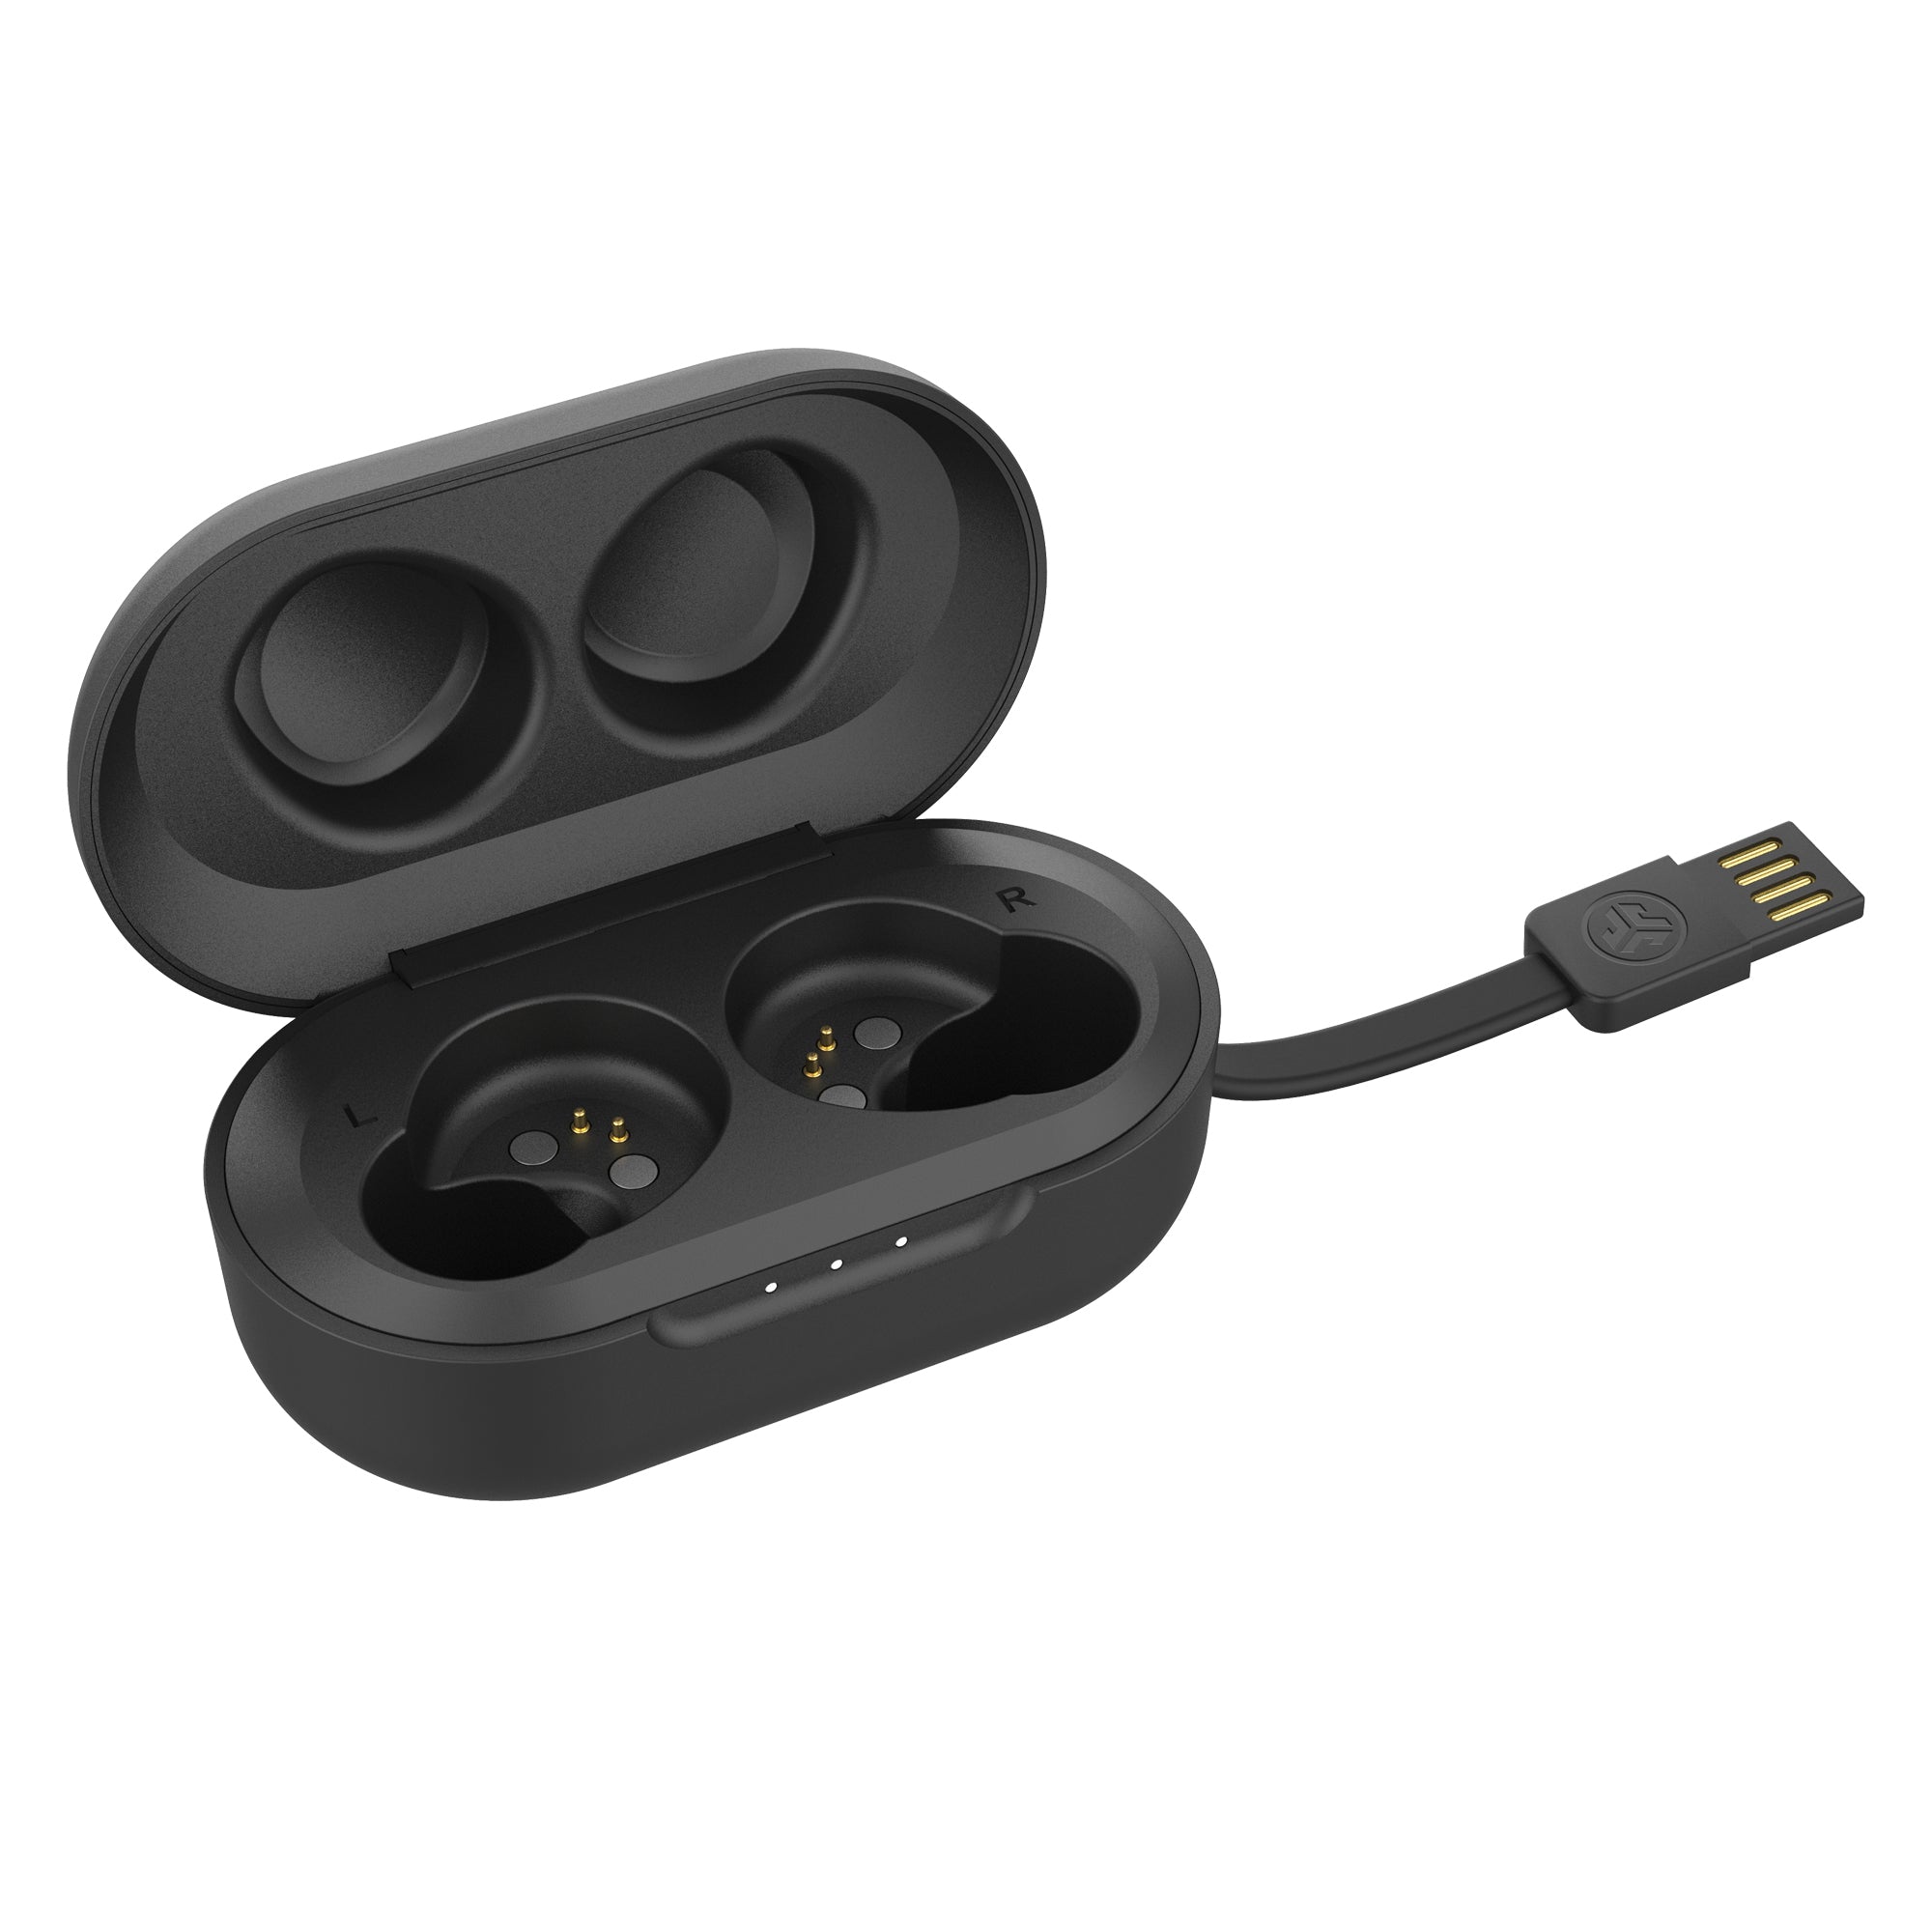 How To Charge Jlab Wireless Earbuds